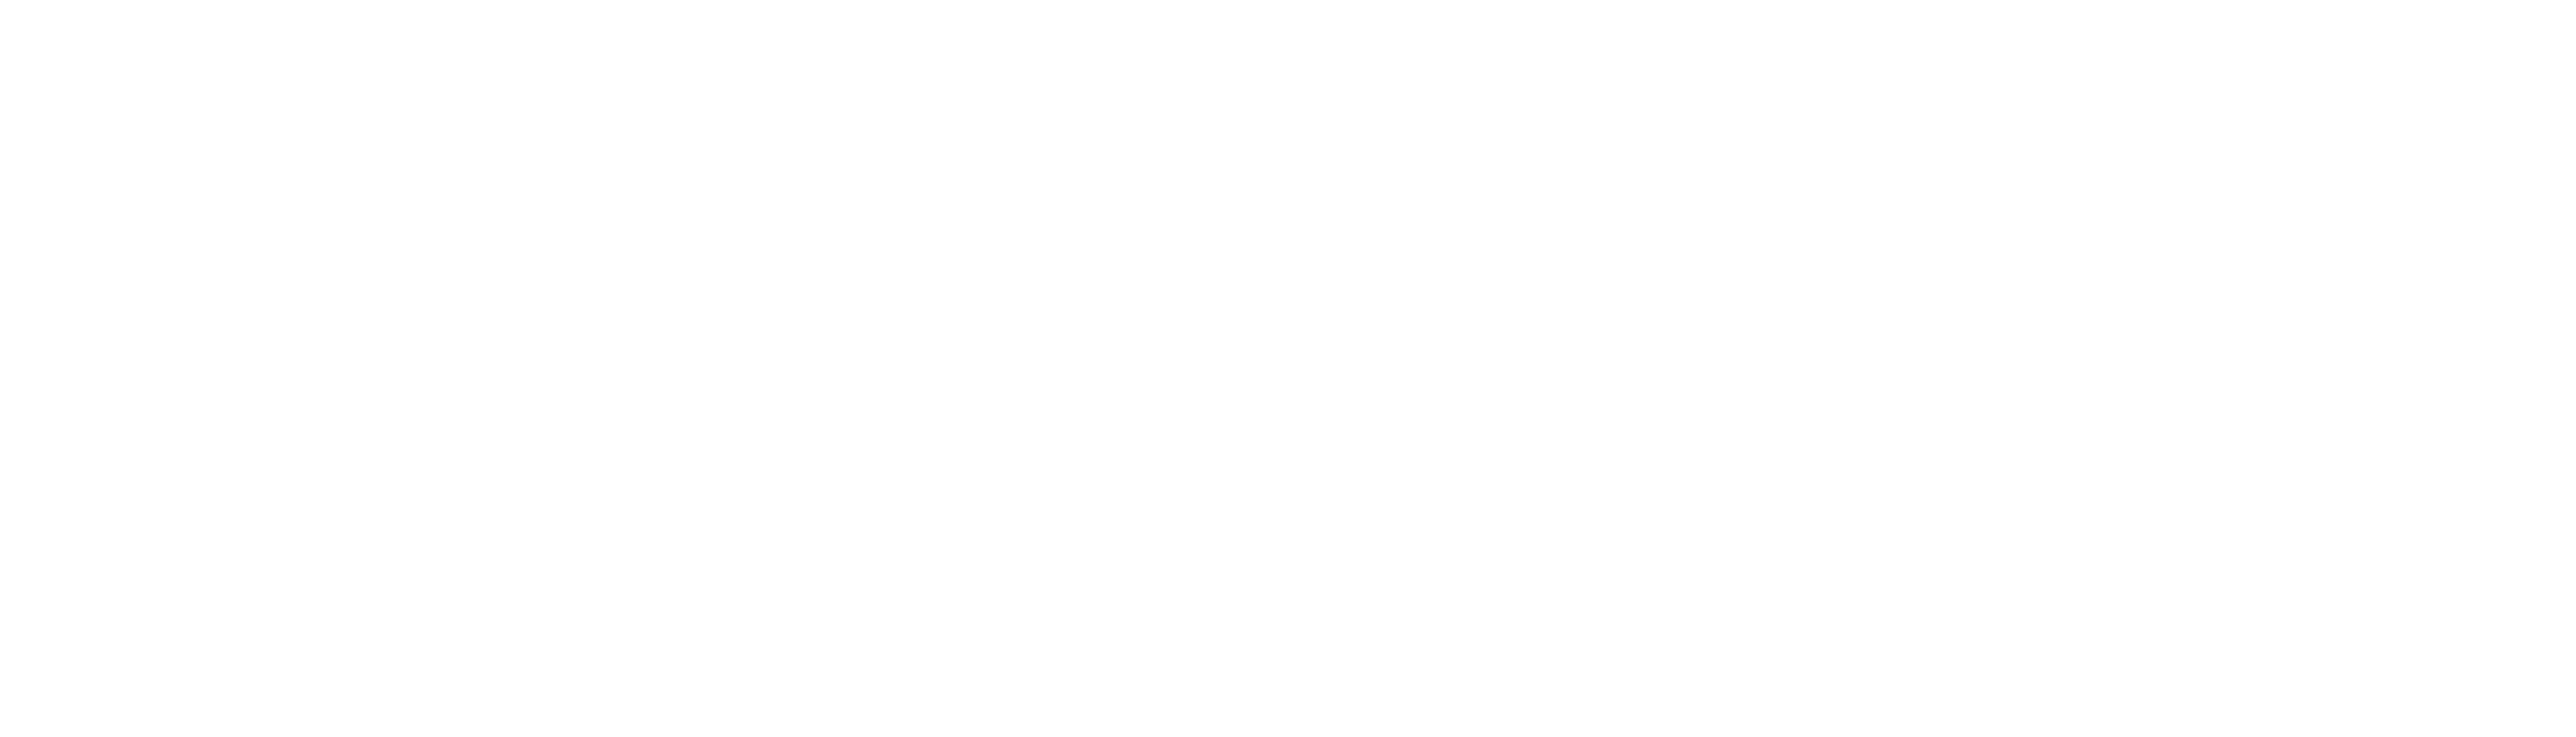 Drug and Alcohol Recovery HMP Ashfield logo in white